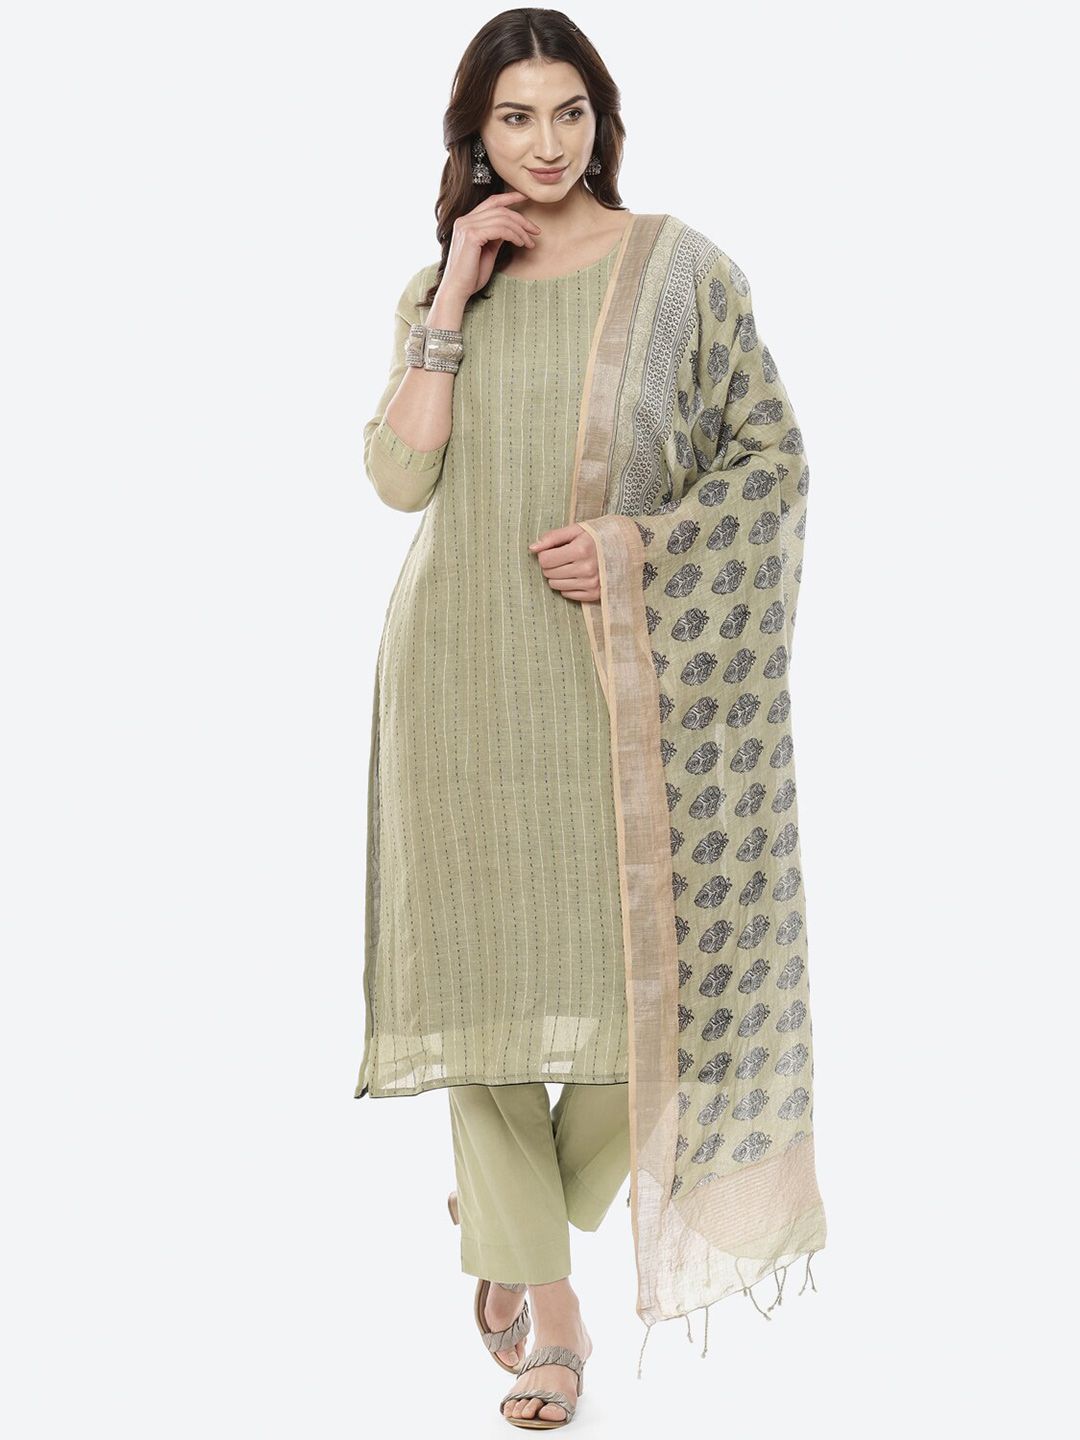 Biba Beige & Blue Ethnic Motifs Printed Linen Unstitched Dress Material Price in India